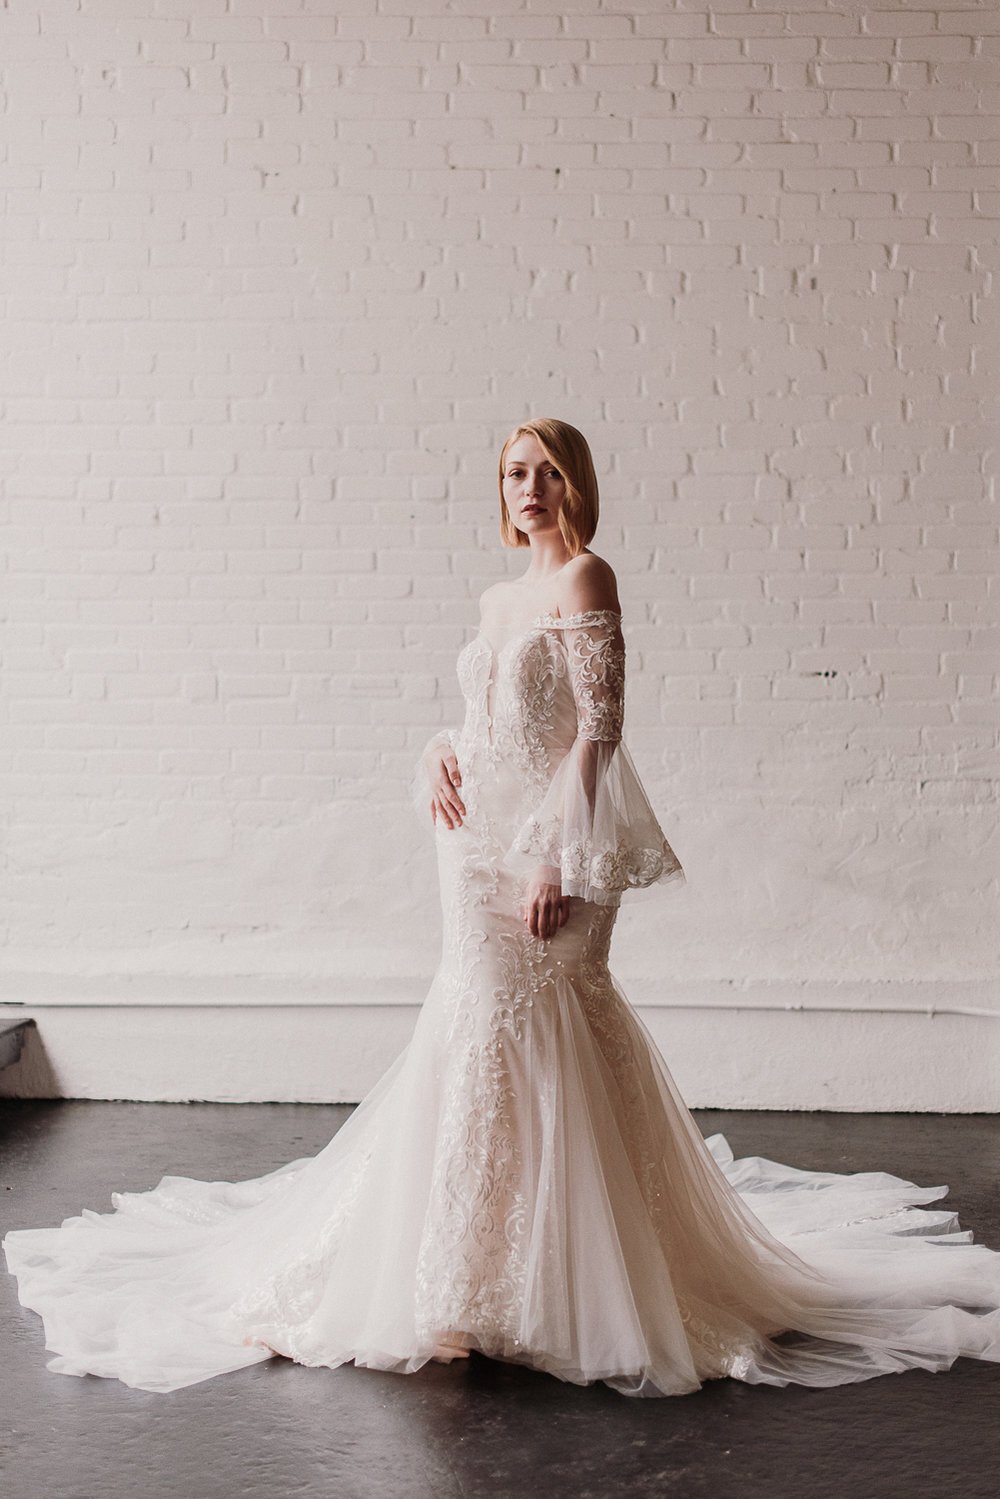 Statement Sleeve Gowns Perfect For Your Fall Wedding Under $1,000